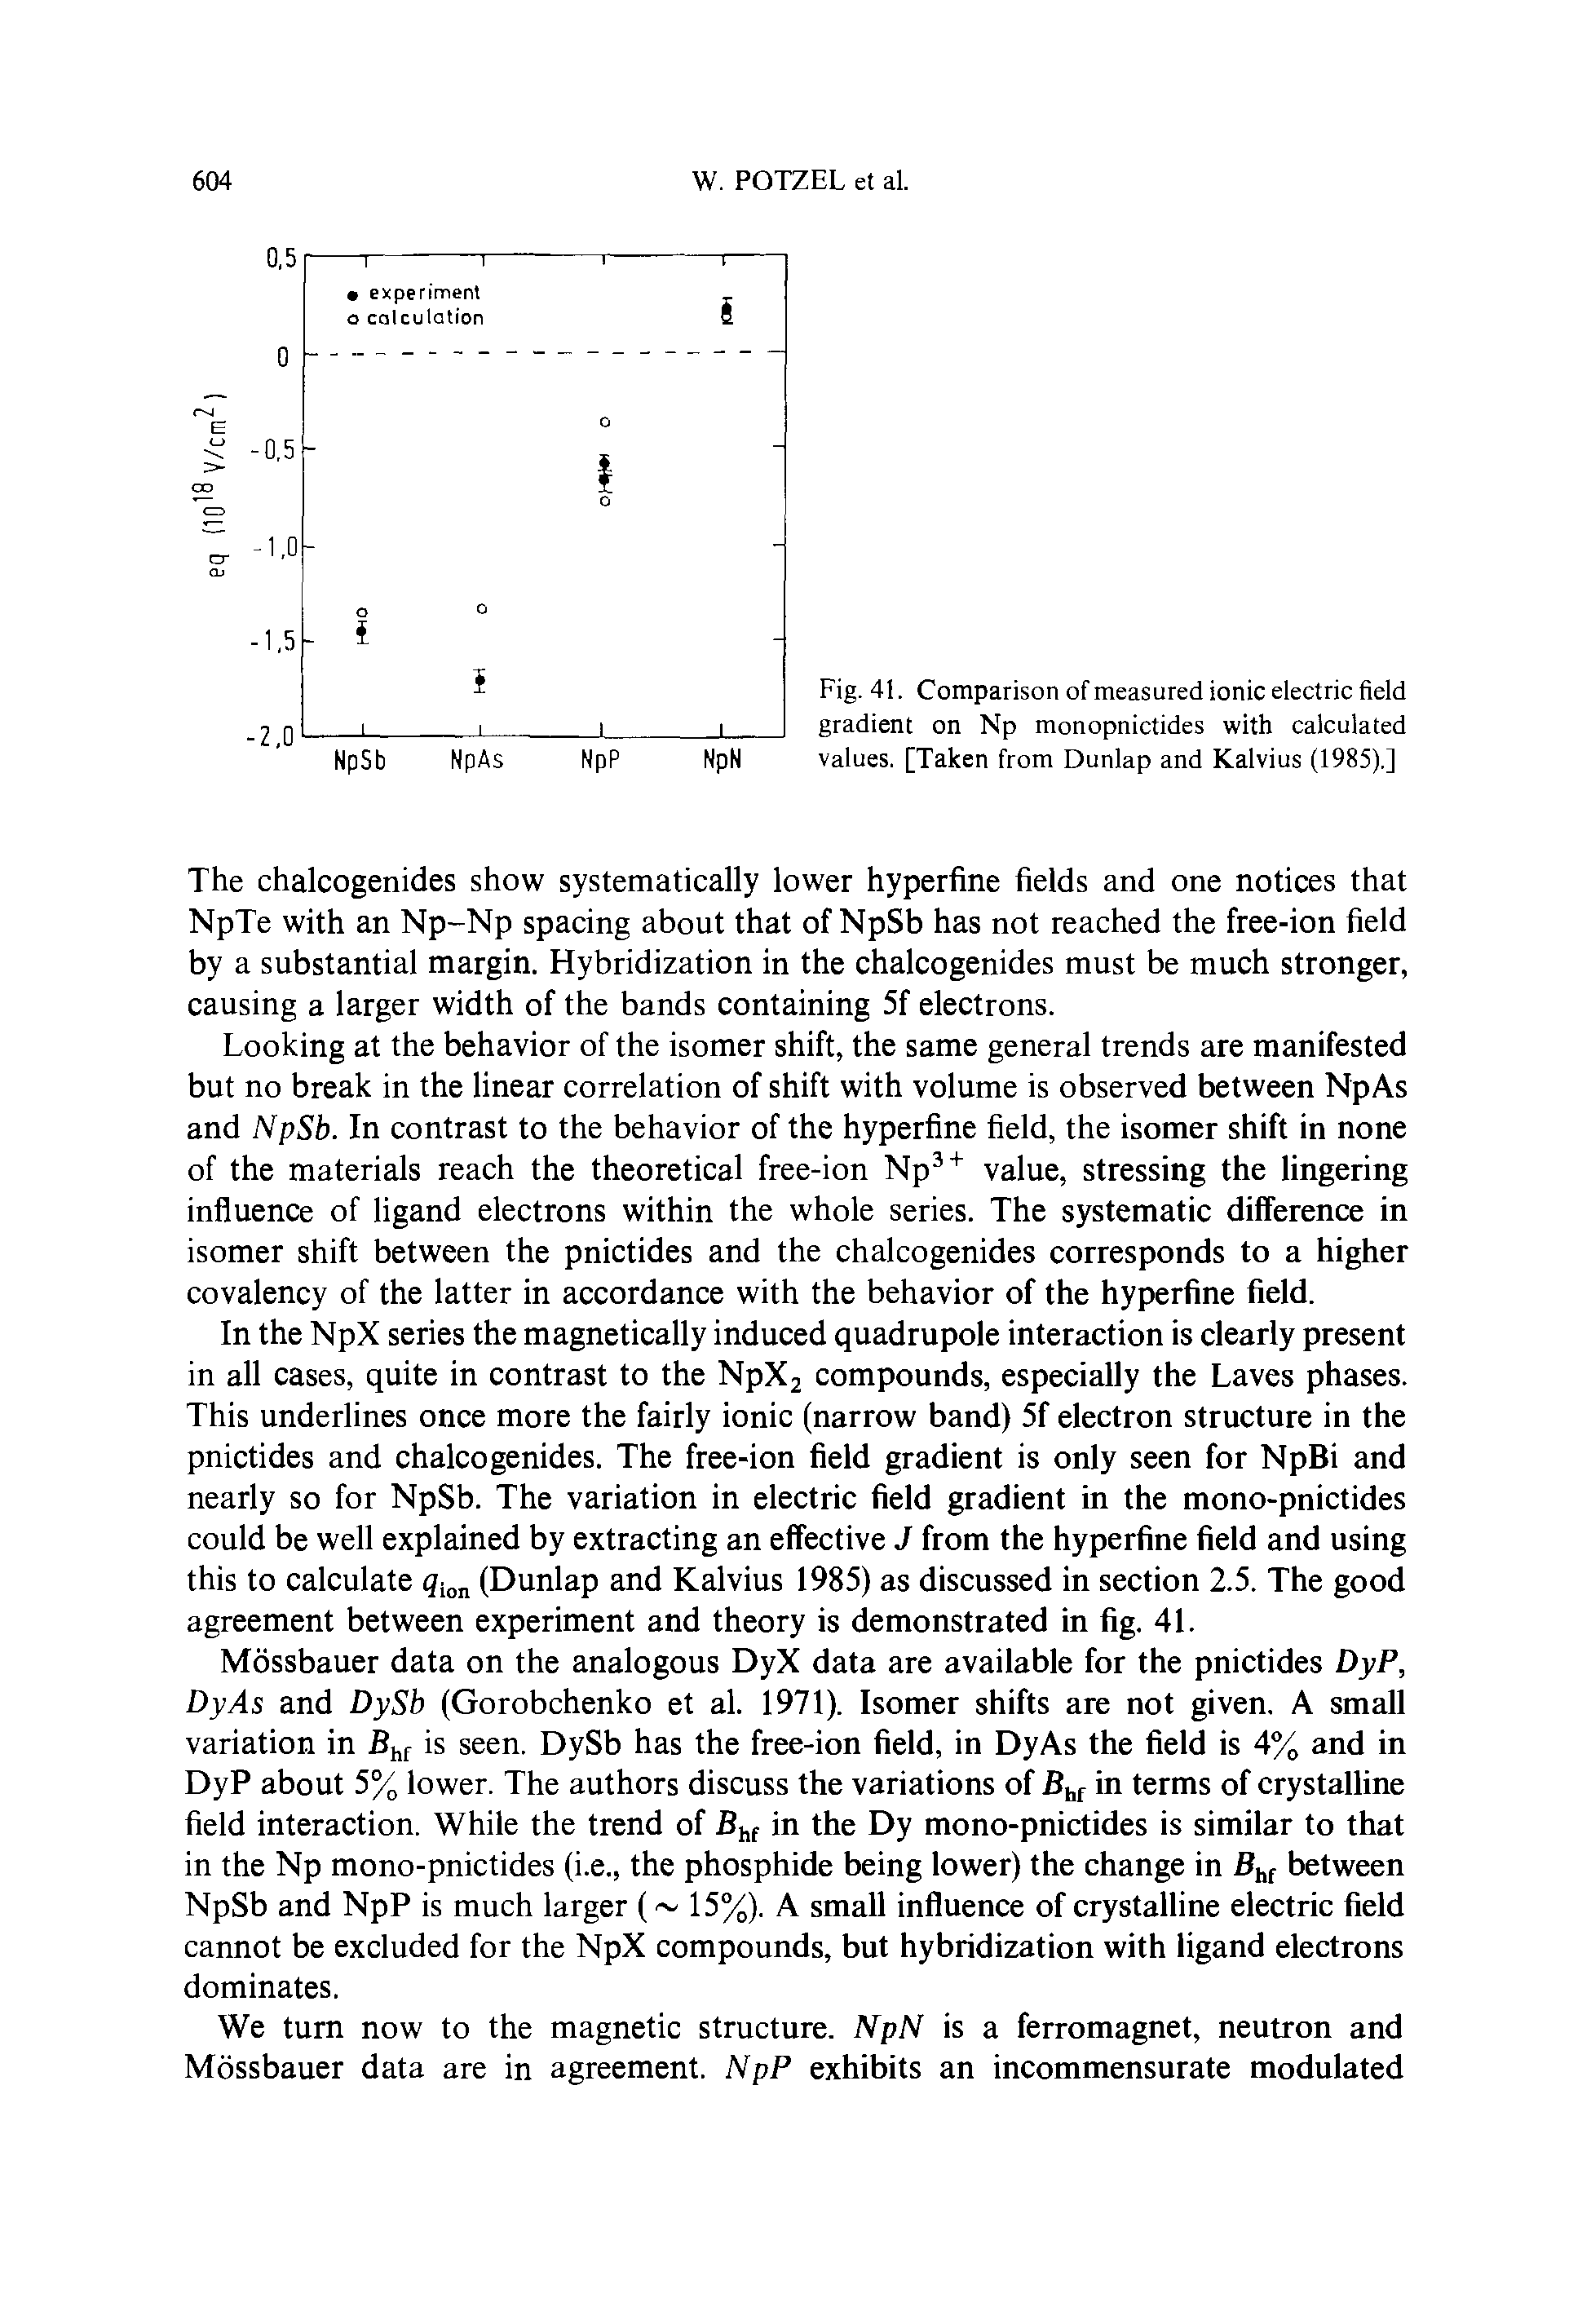 Fig. 41. Comparison of measured ionic electric field gradient on Np monopnictides with calculated NpN values, [Taken from Dunlap and Kalvius (1985).]...